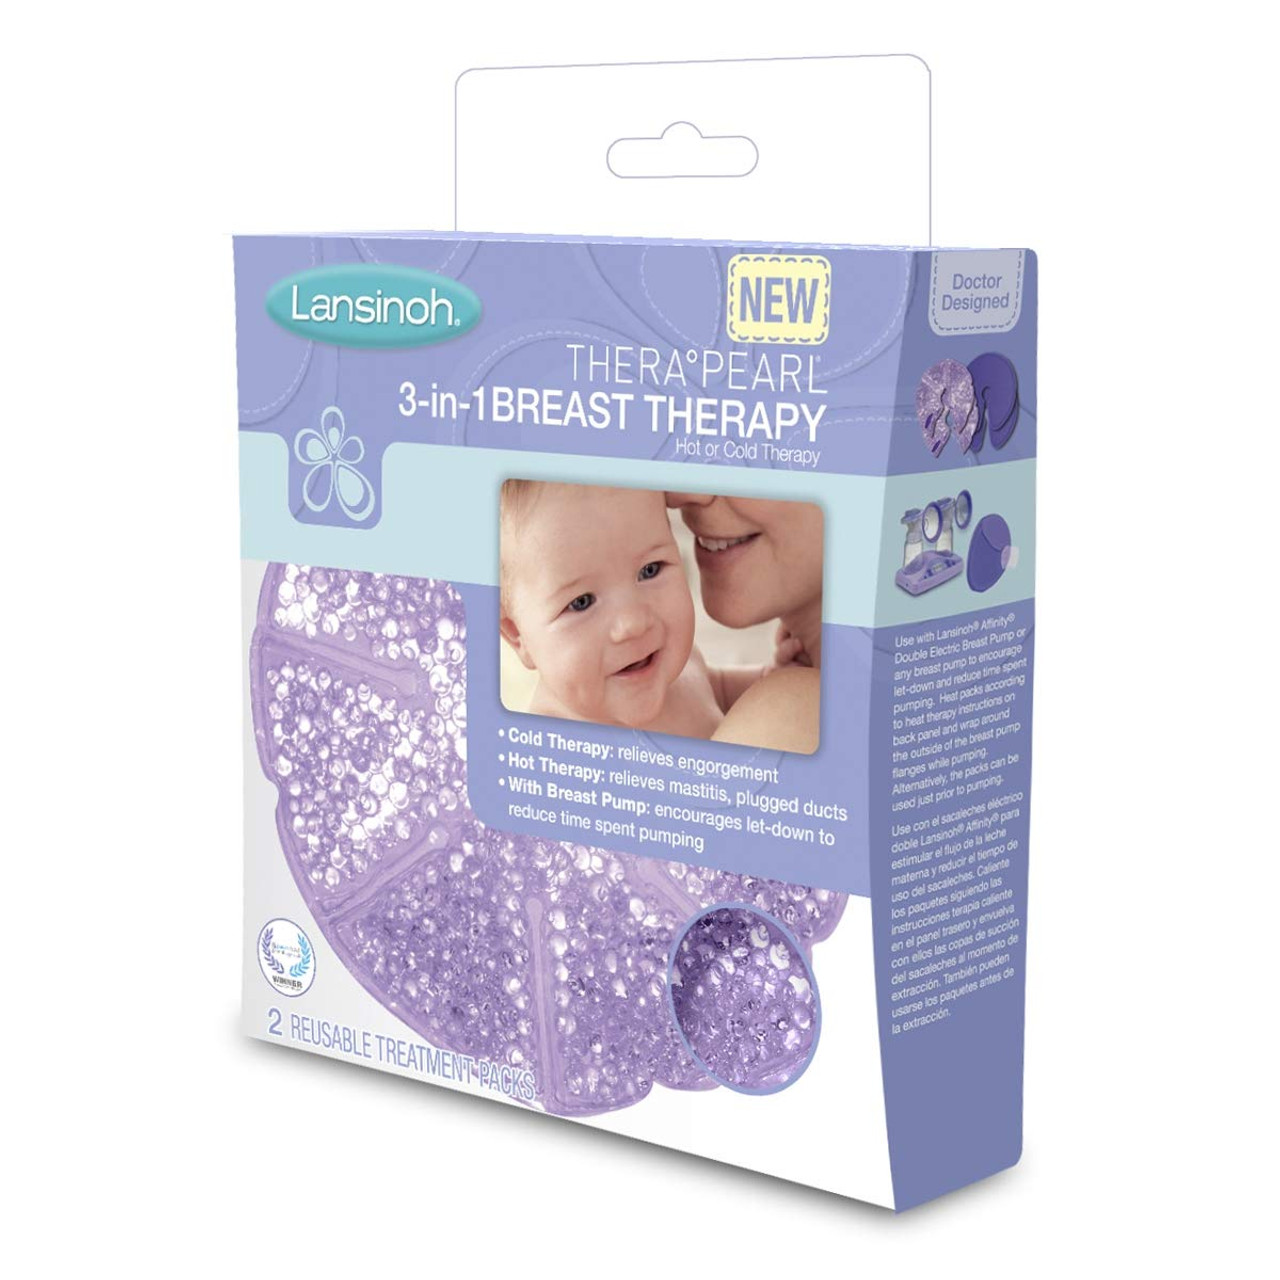 Lansinoh Therapearl 3-in-1 Breast Therapy Packs with Soft Covers - 2pk